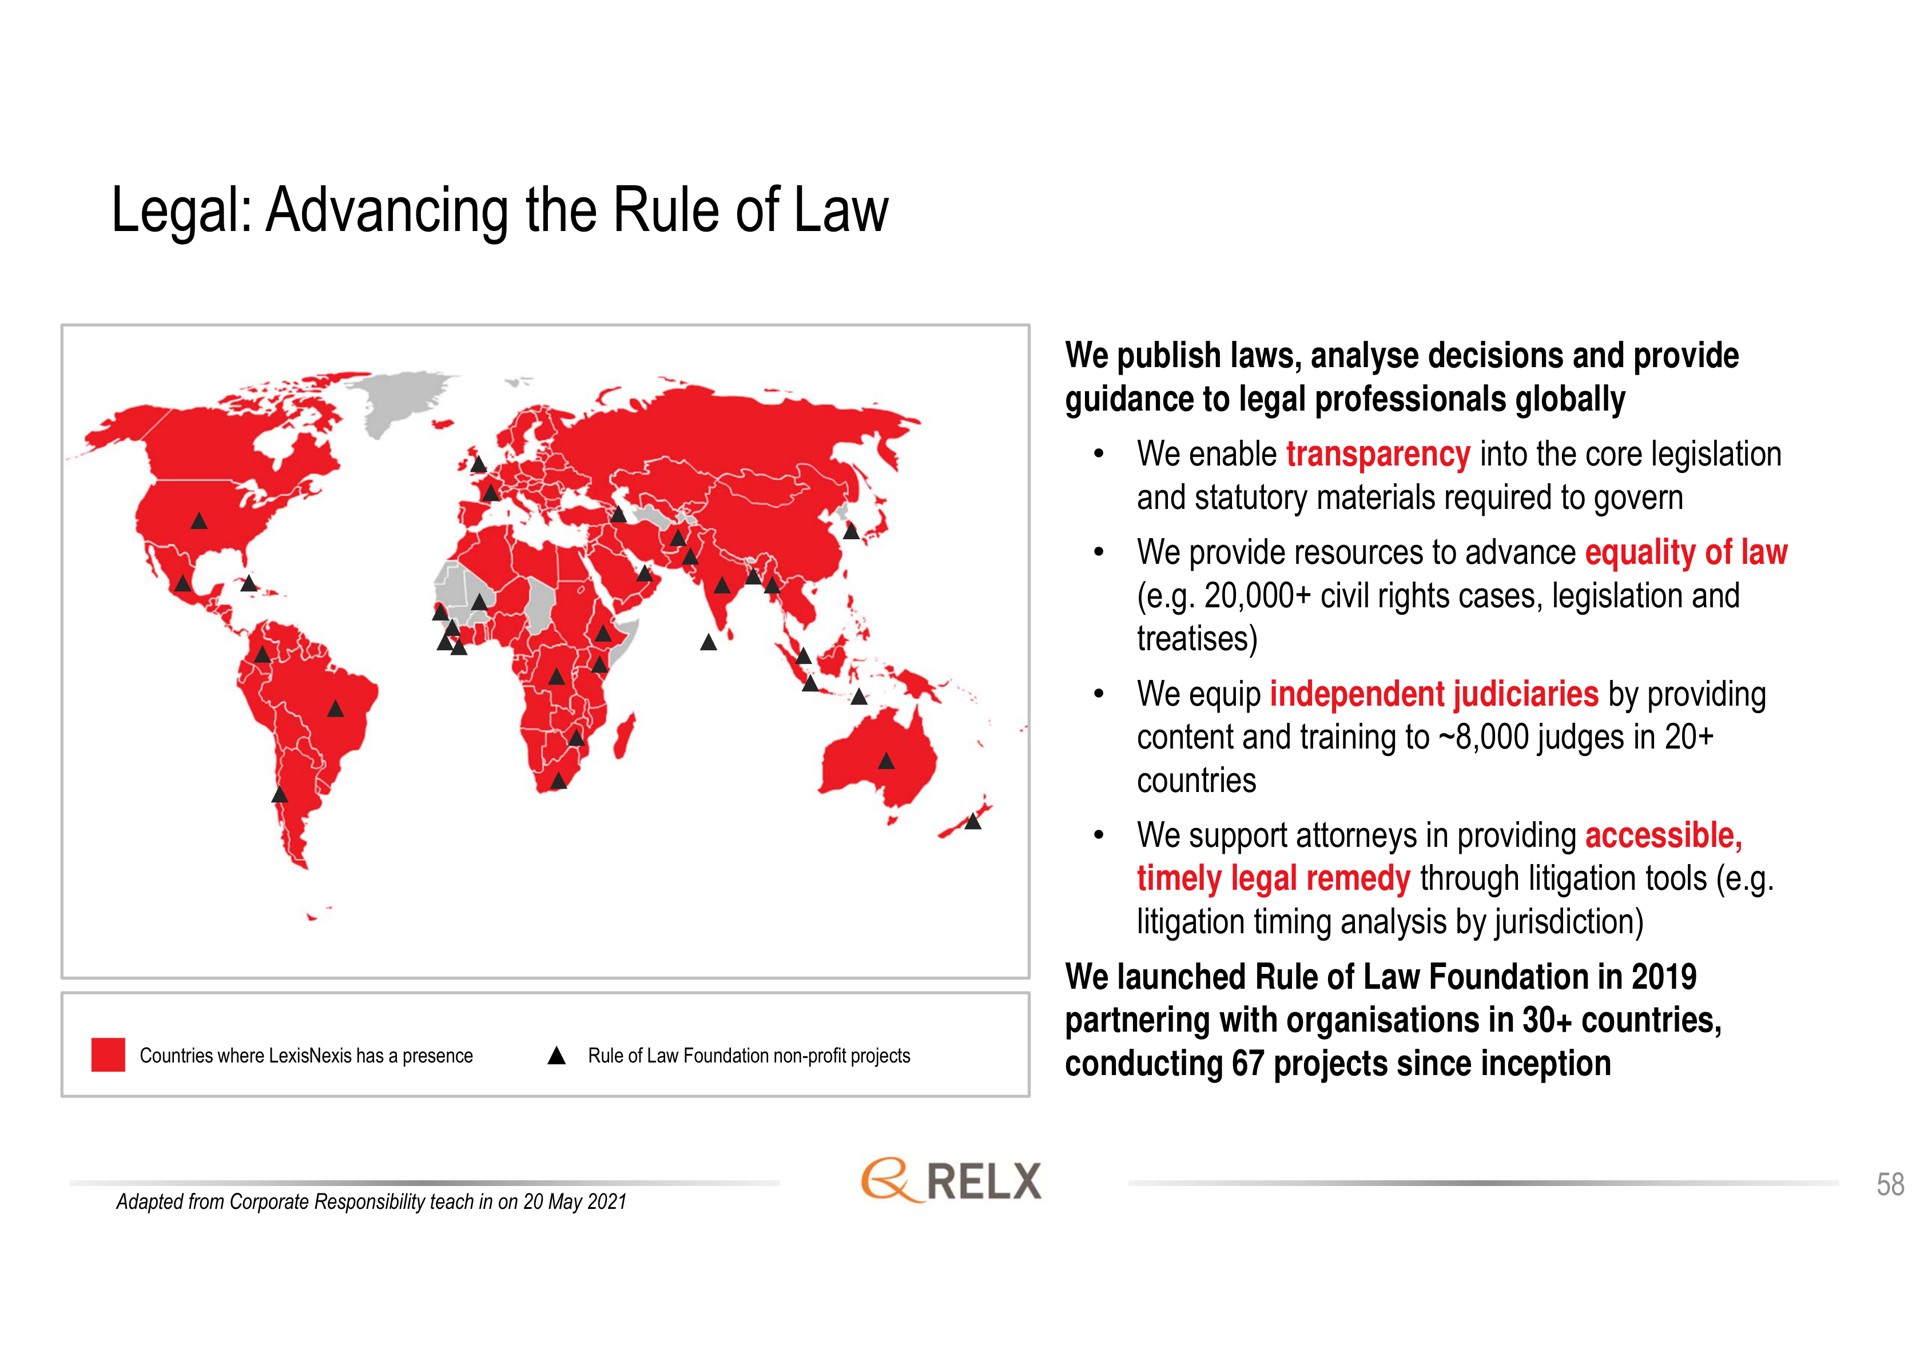 legal advancing the rule of law | RELX